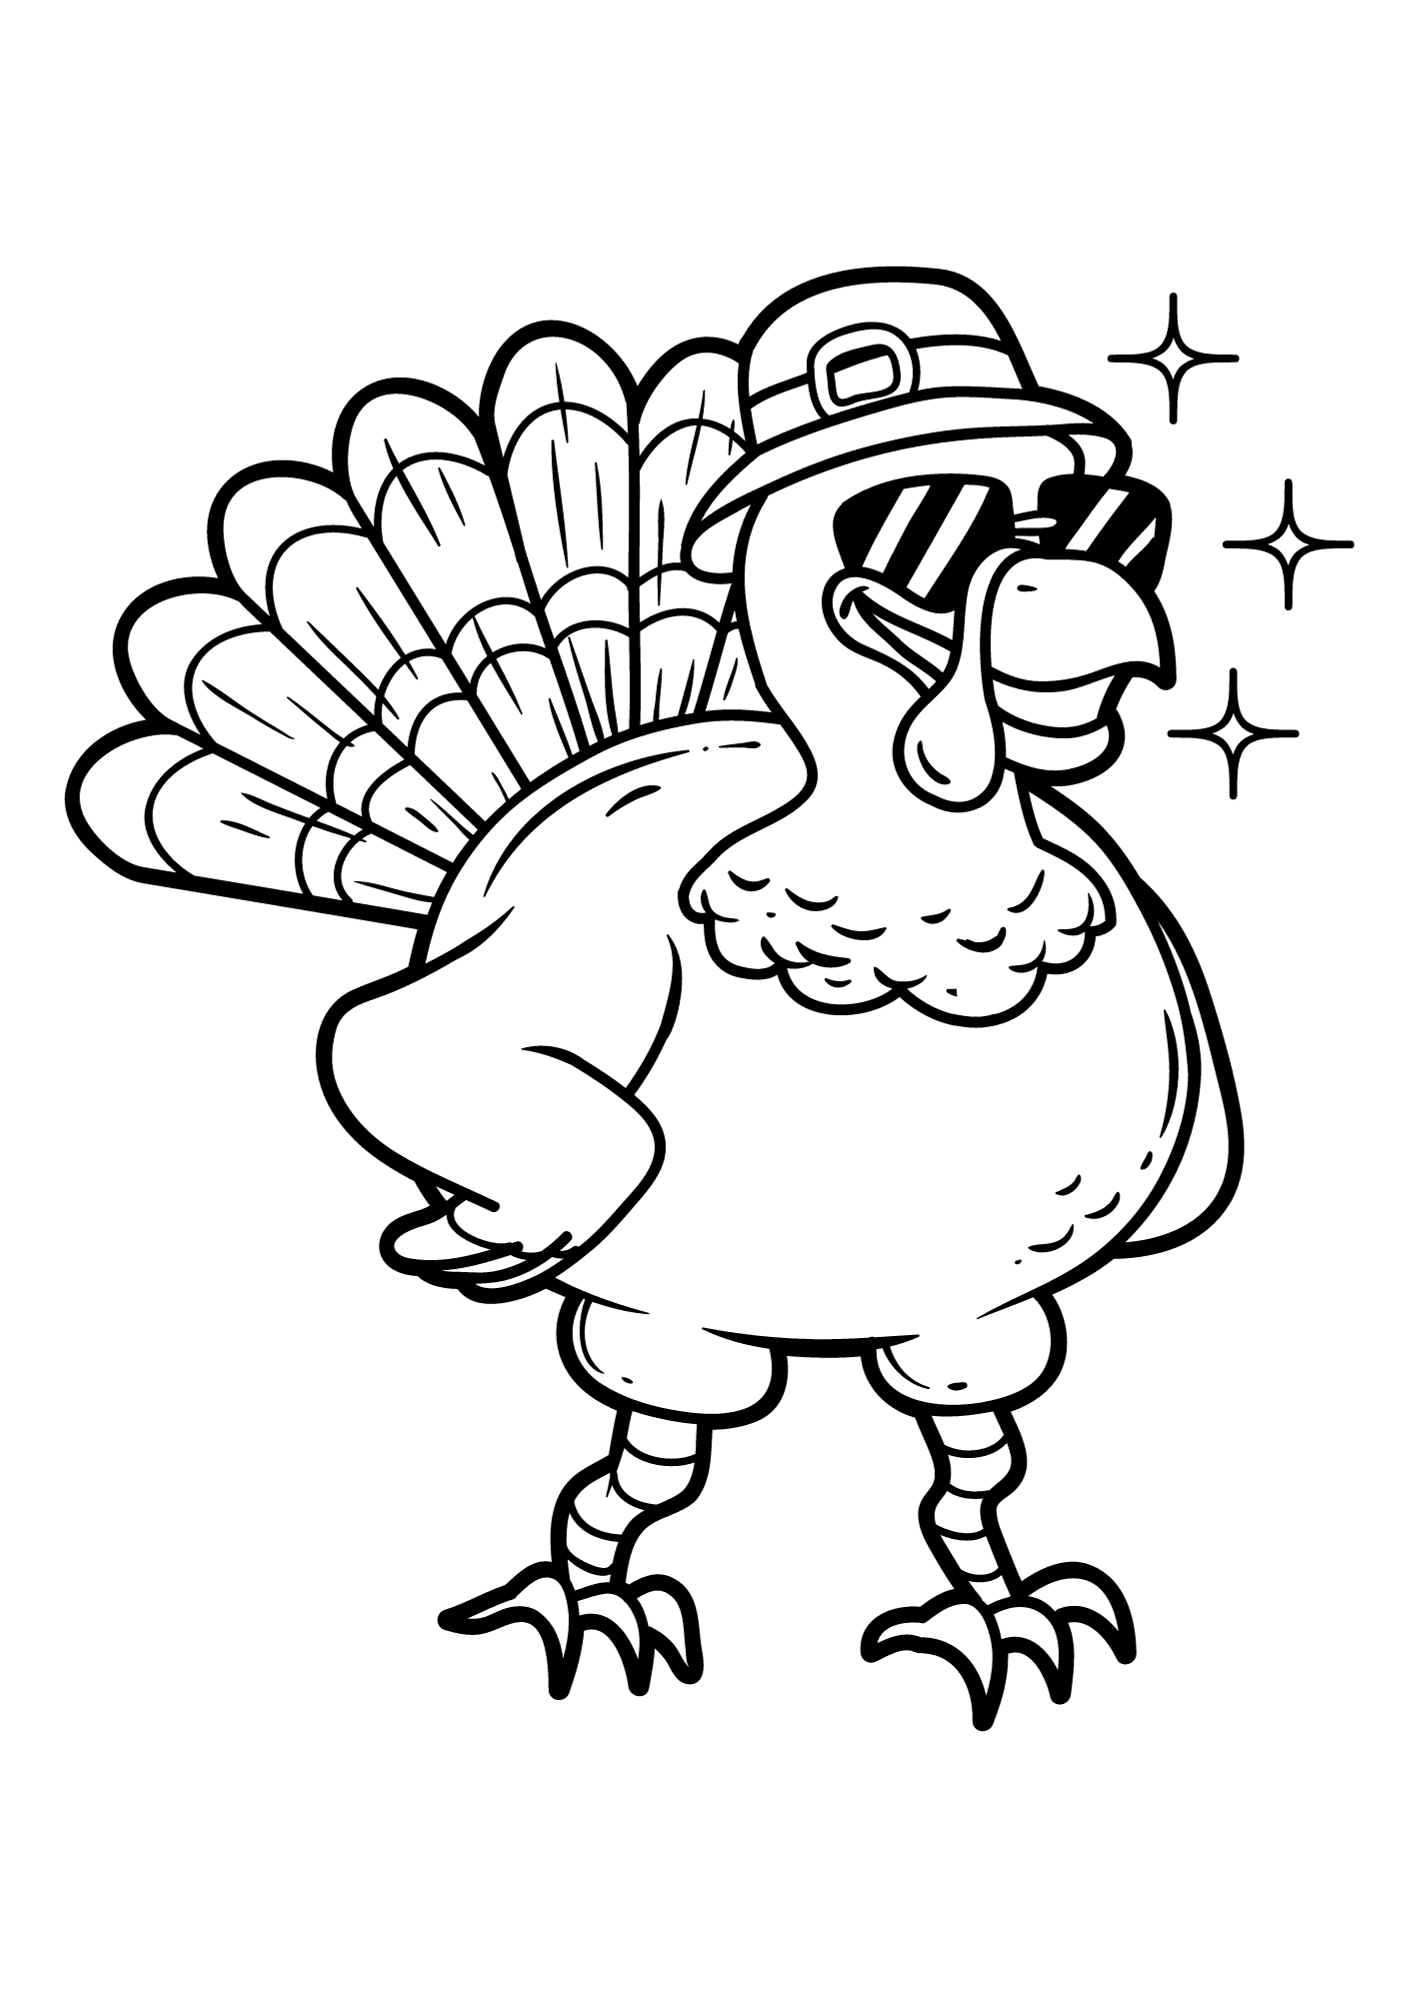 Cool Turkey Thanksgiving Food Coloring Page